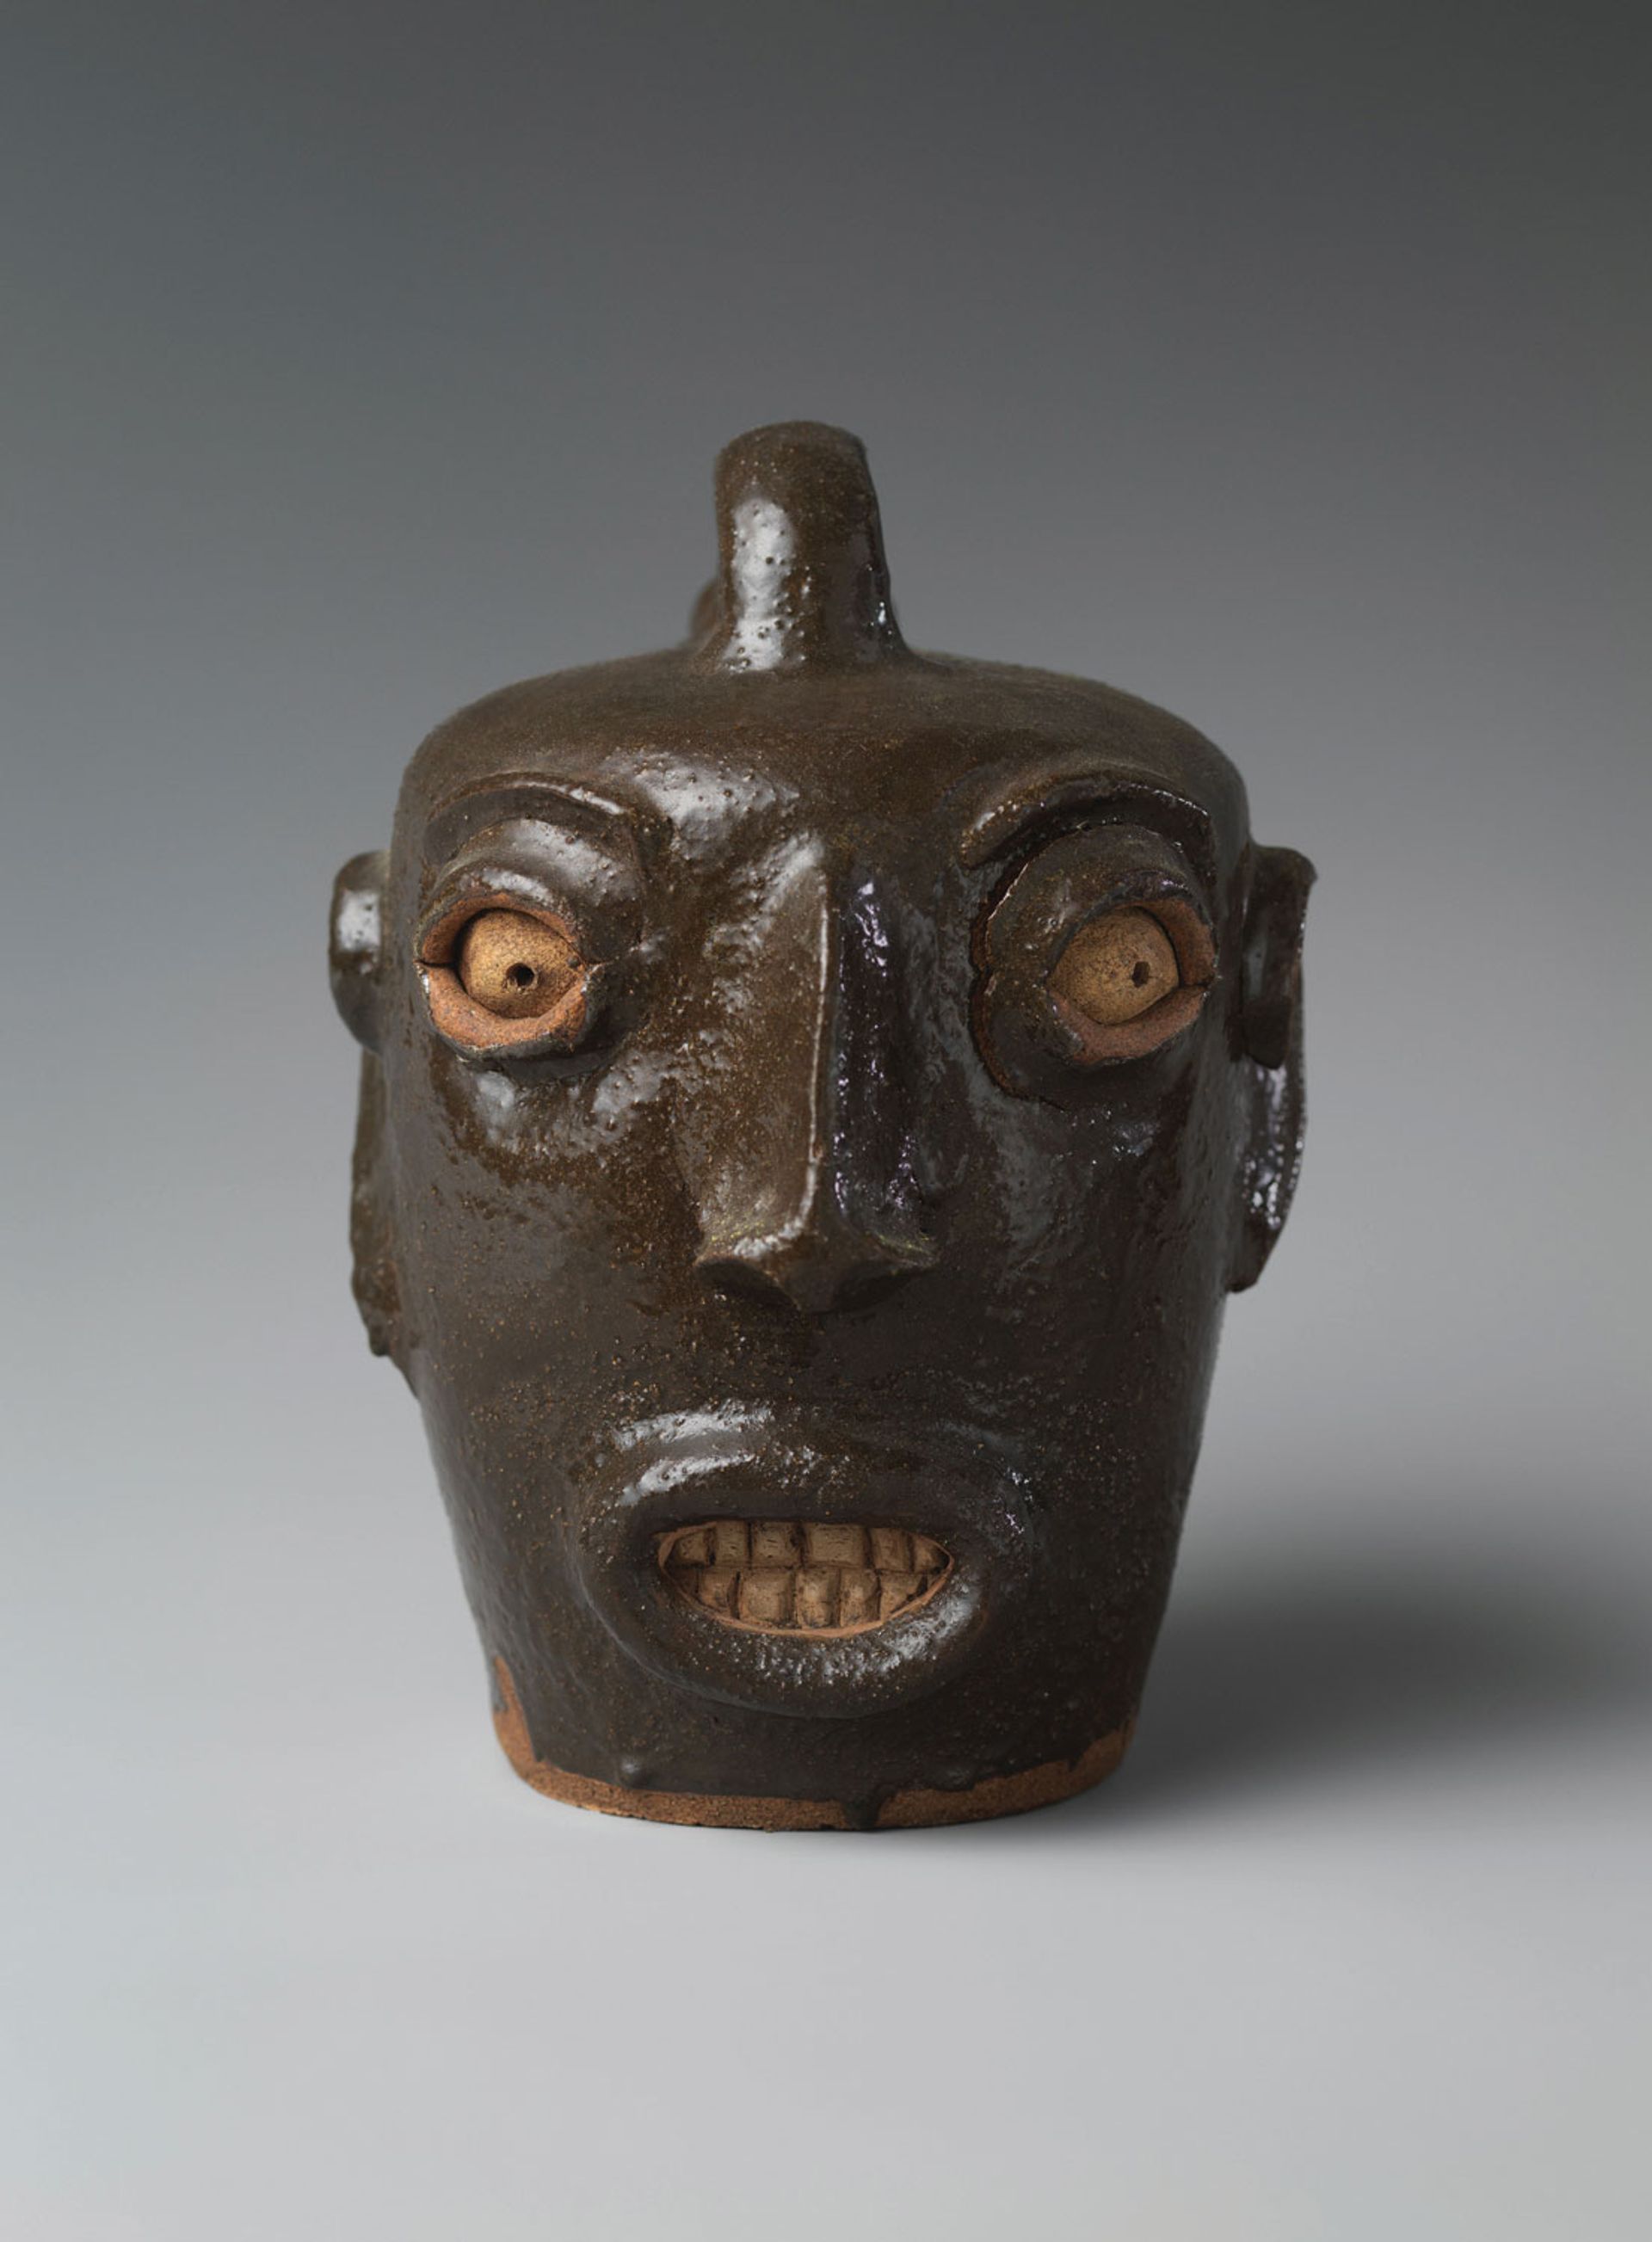 Unfettered expression: an Edgefield potter’s face jug (around 1867–85)

Hudgins Family Collection, New York
